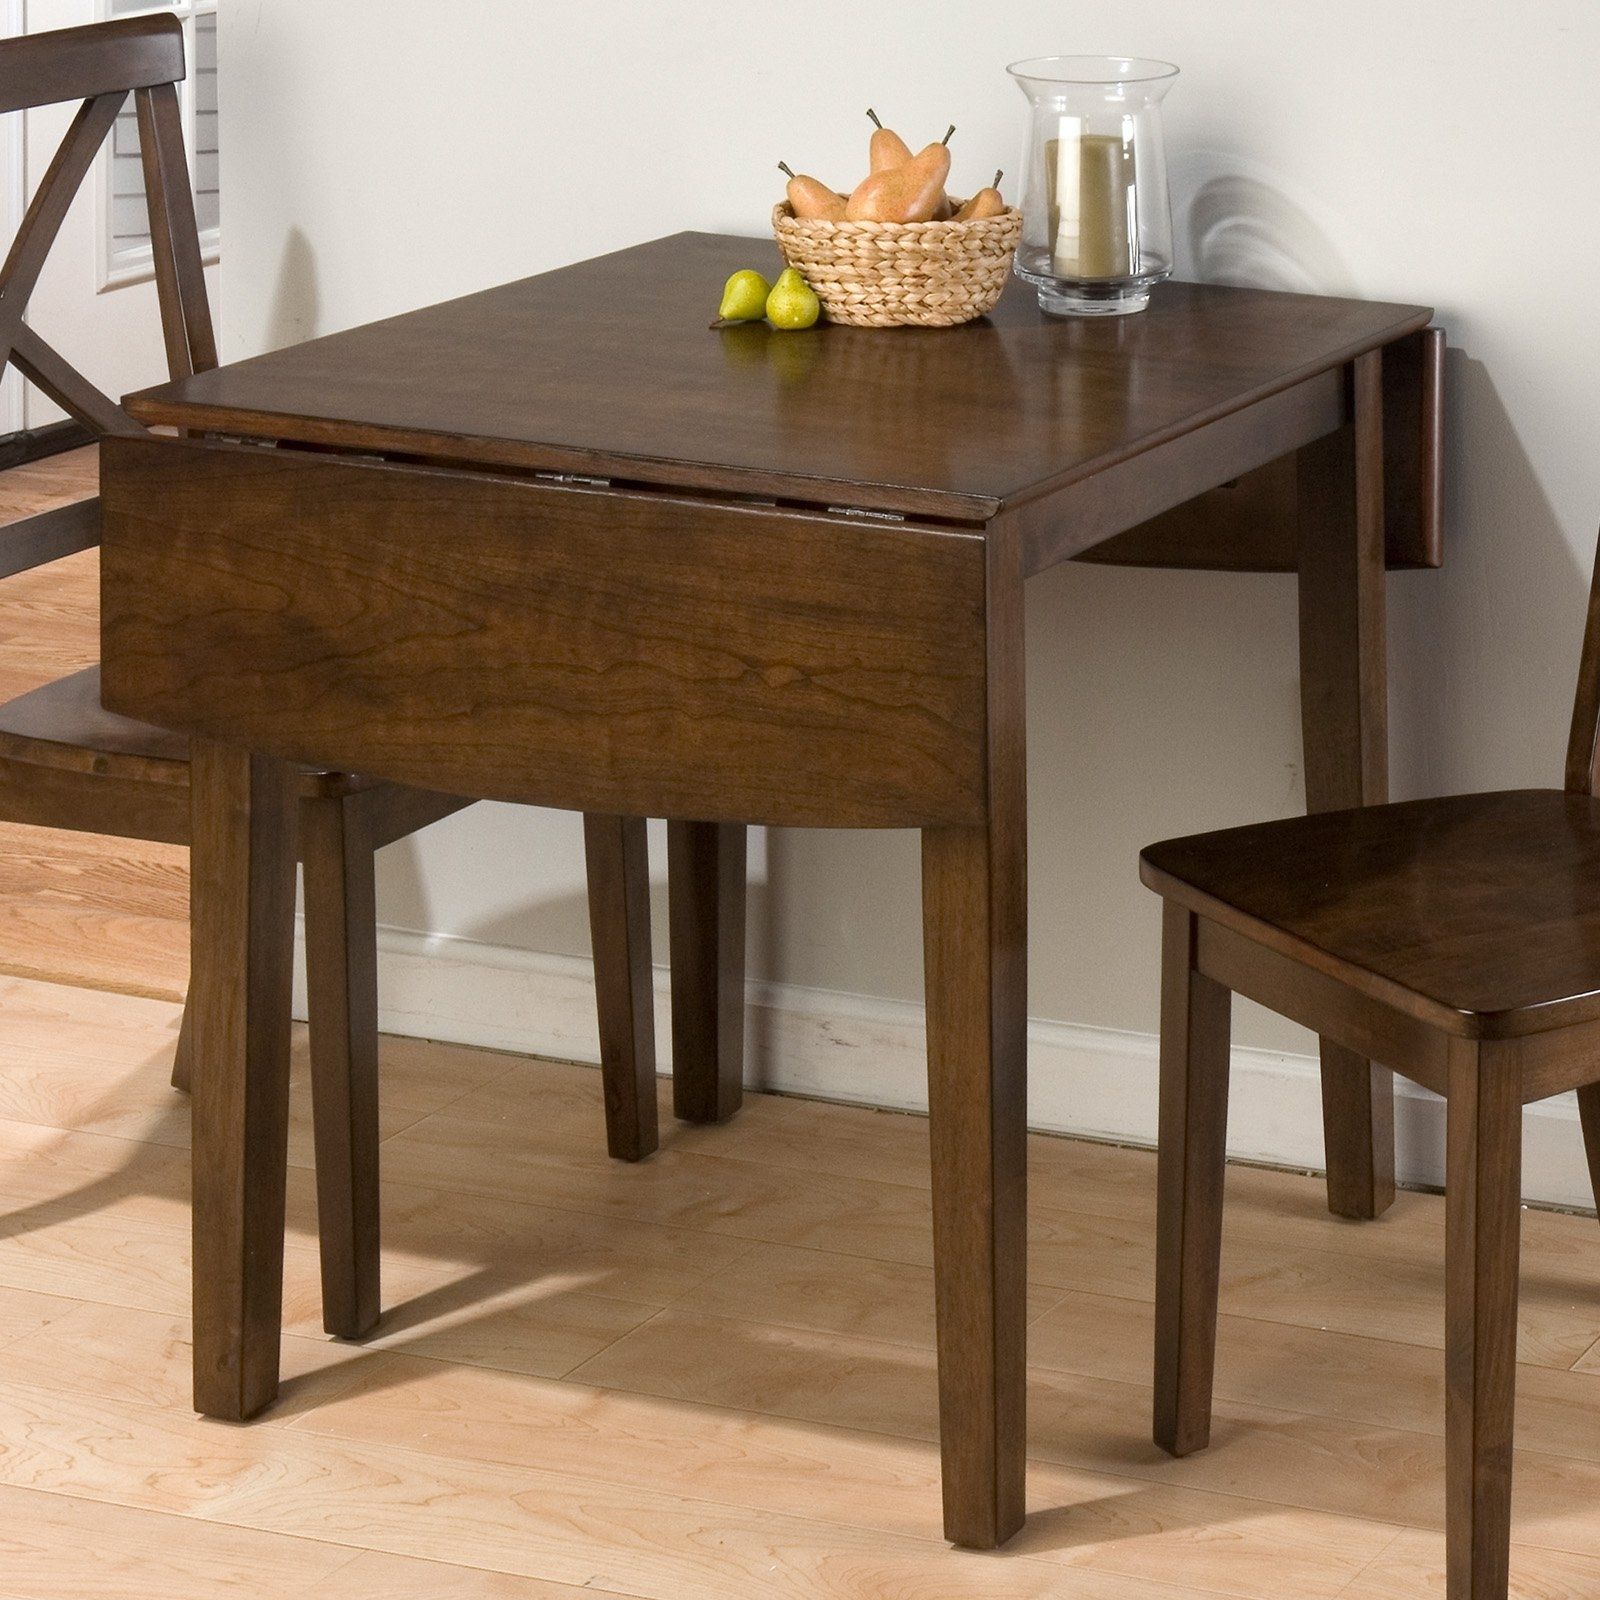 Most Recent Drop Leaf Extendable Dining Tables With Regard To Jofran Taylor Drop Leaf Dining Table – Walmart (View 11 of 25)